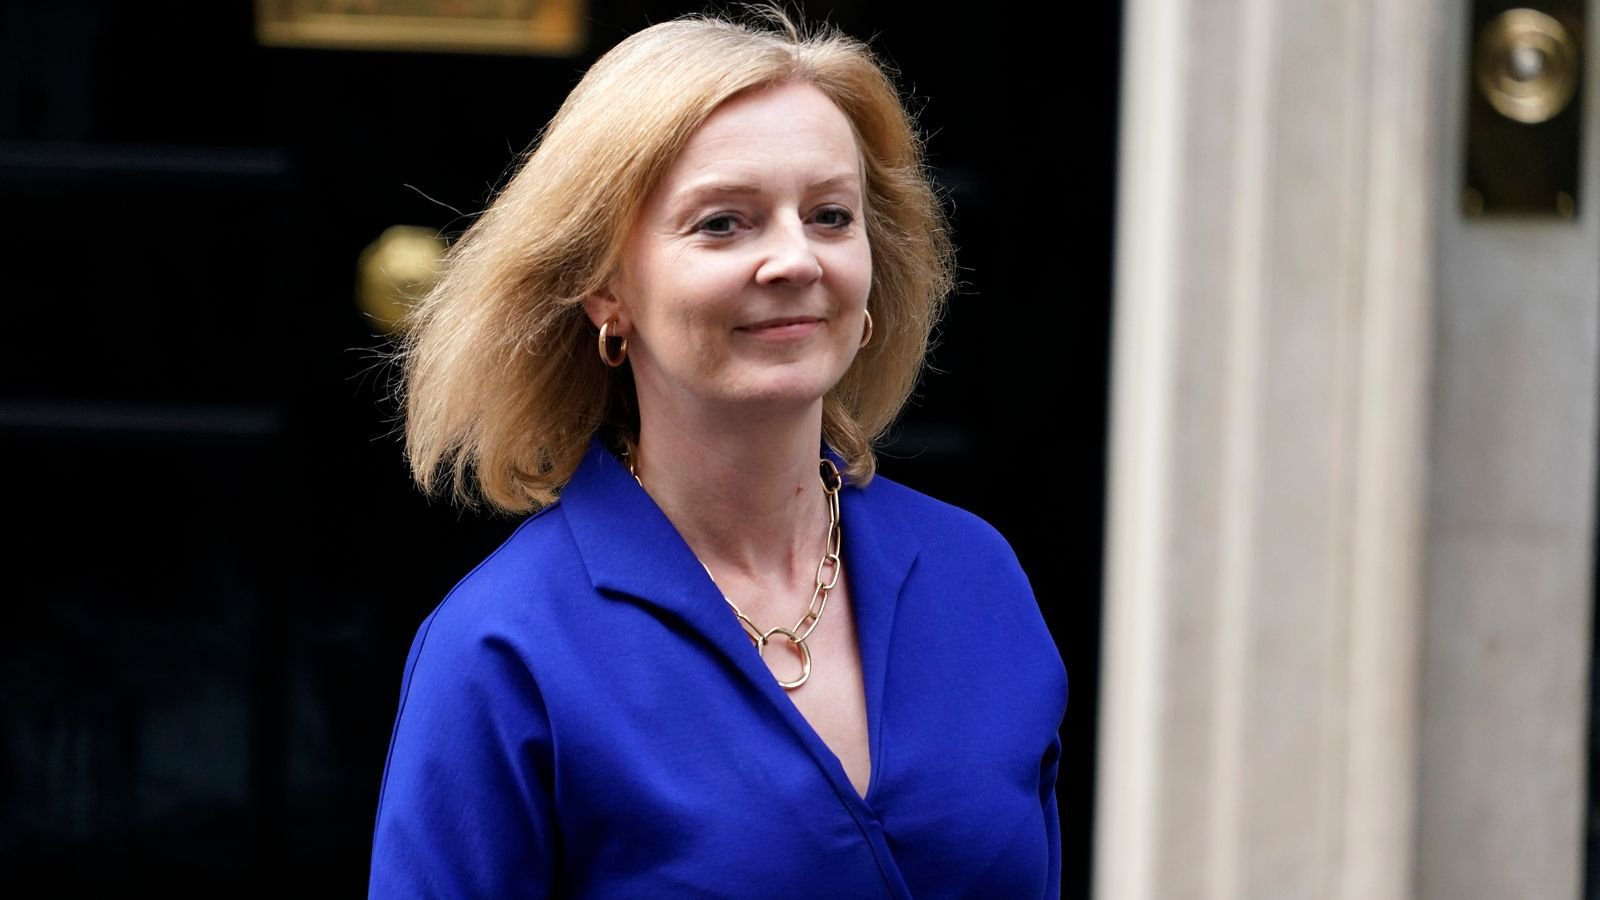 Cabinet reshuffle: Liz Truss 'delighted' to be promoted to foreign secretary as two of four top jobs go to women